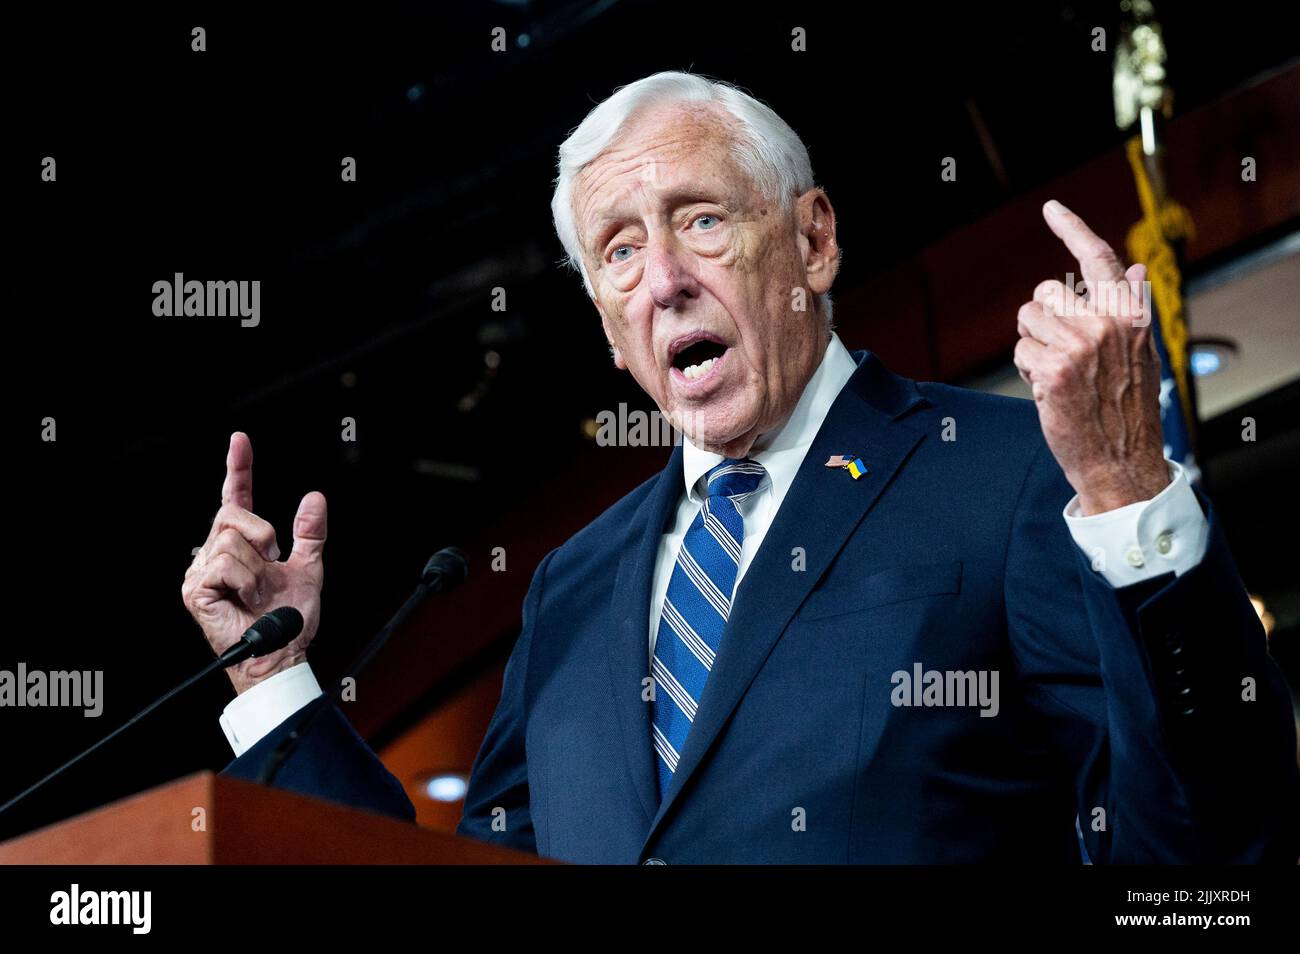 July 28, 2022, Washington, District of Columbia, United States: U.S. Representative STENY HOYER (D-MD) speaking at a press conference about the Wildfire Response and Drought Resiliency Act (Credit Image: © Michael Brochstein/ZUMA Press Wire) Stock Photo